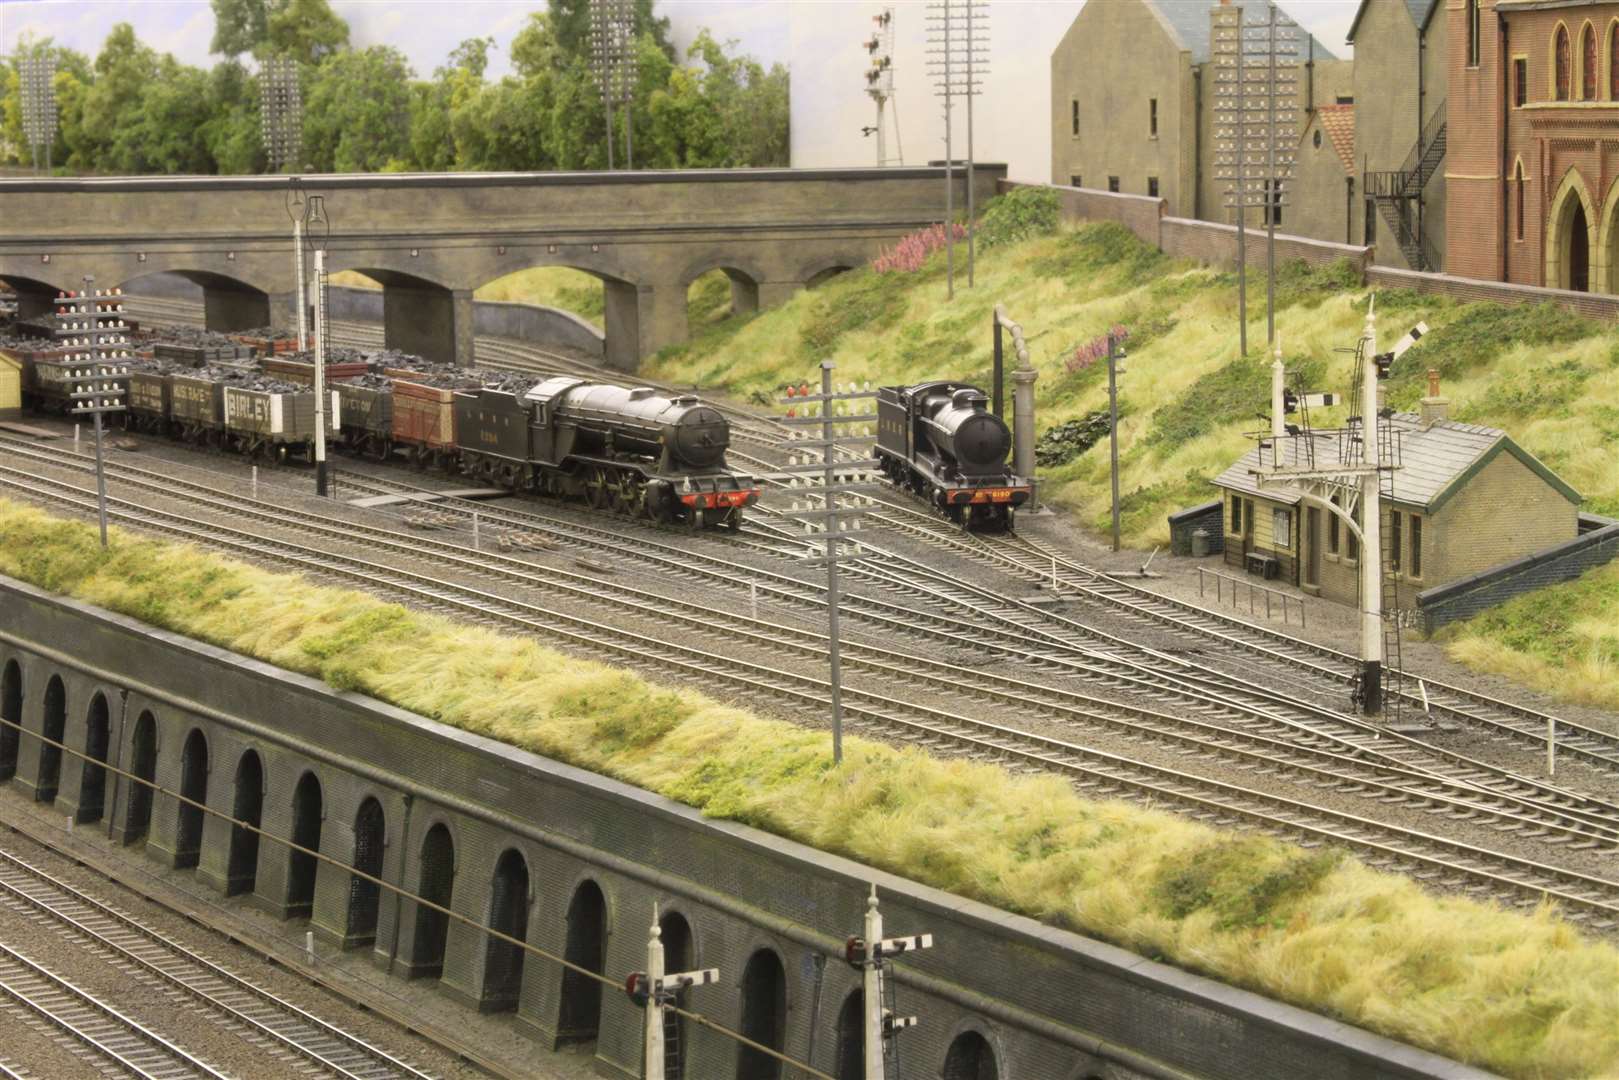 AIMREC is set to celebrate Ashford's rail heritage with a number of displays